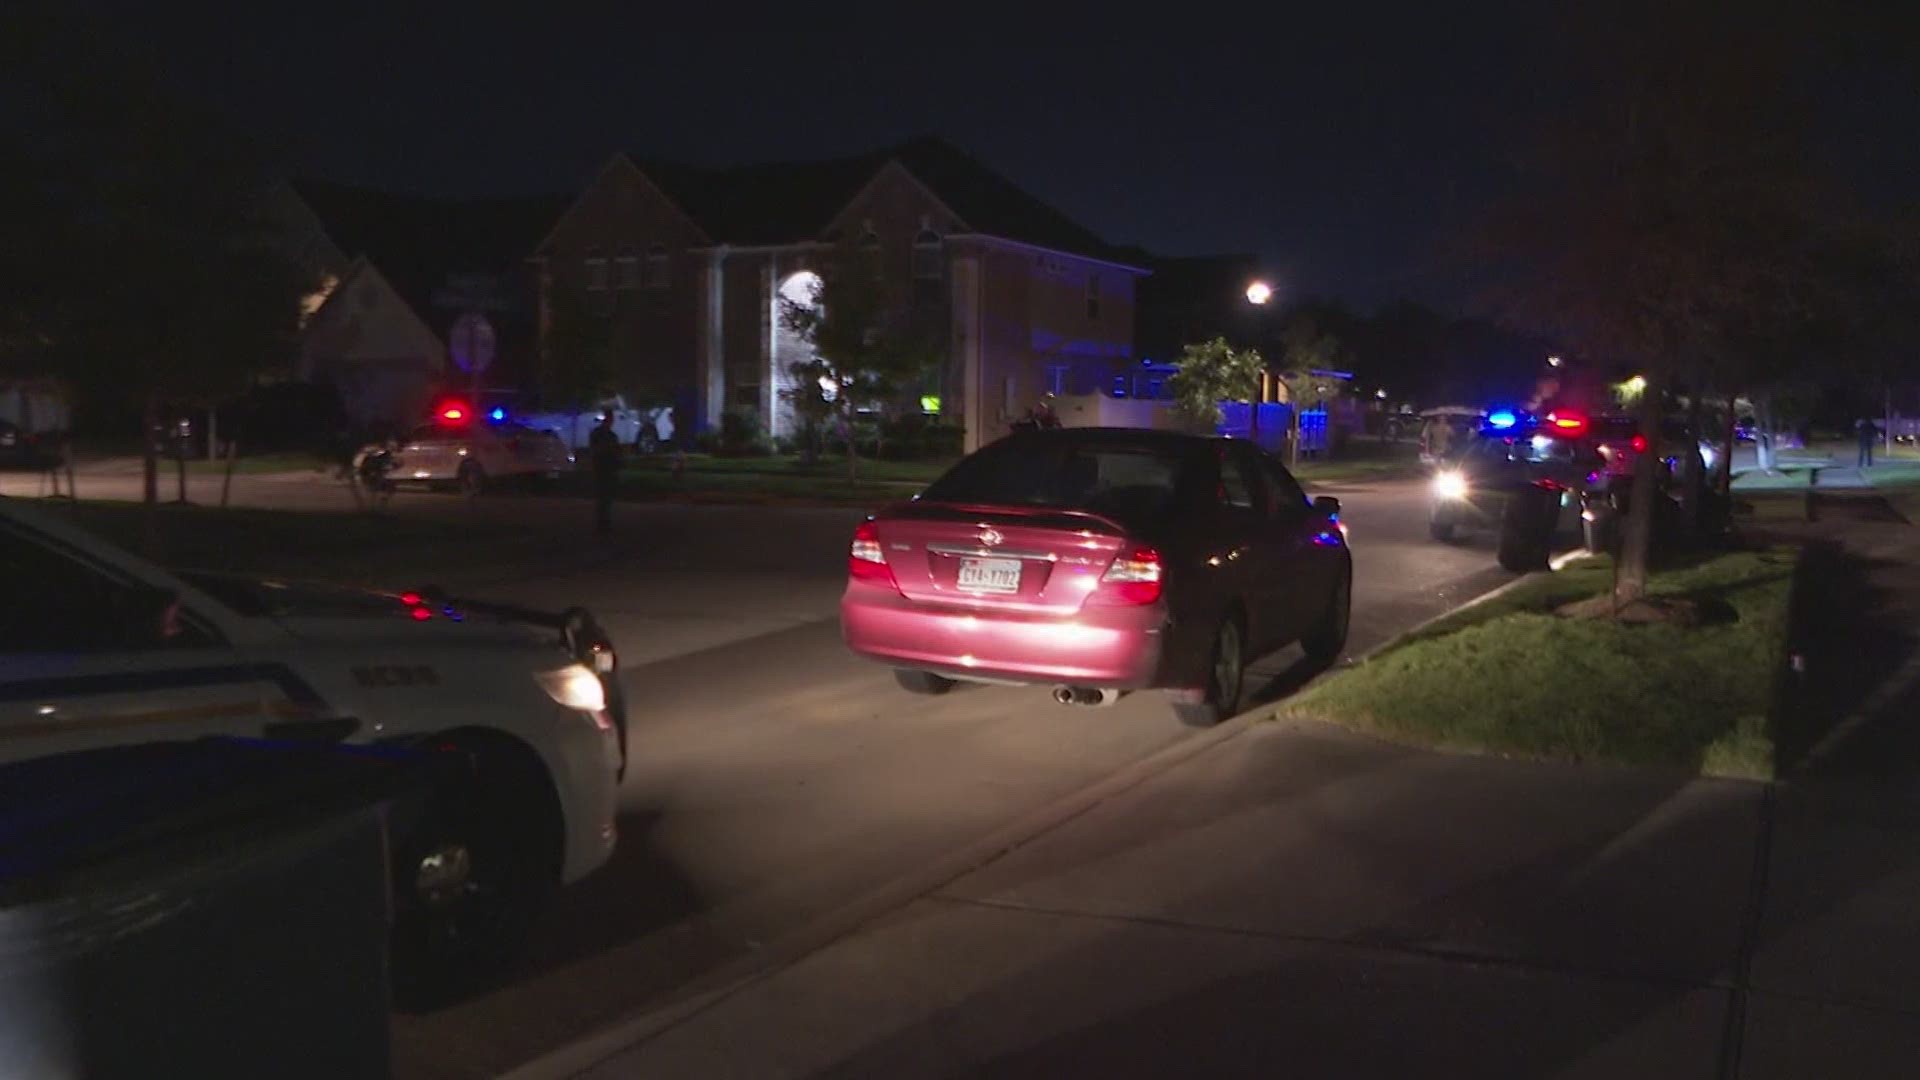 Deputies responded to what they call "a very tragic scene" at a Katy home where they said 2 women were injured and 2 men dead in a domestic disturbance shooting.